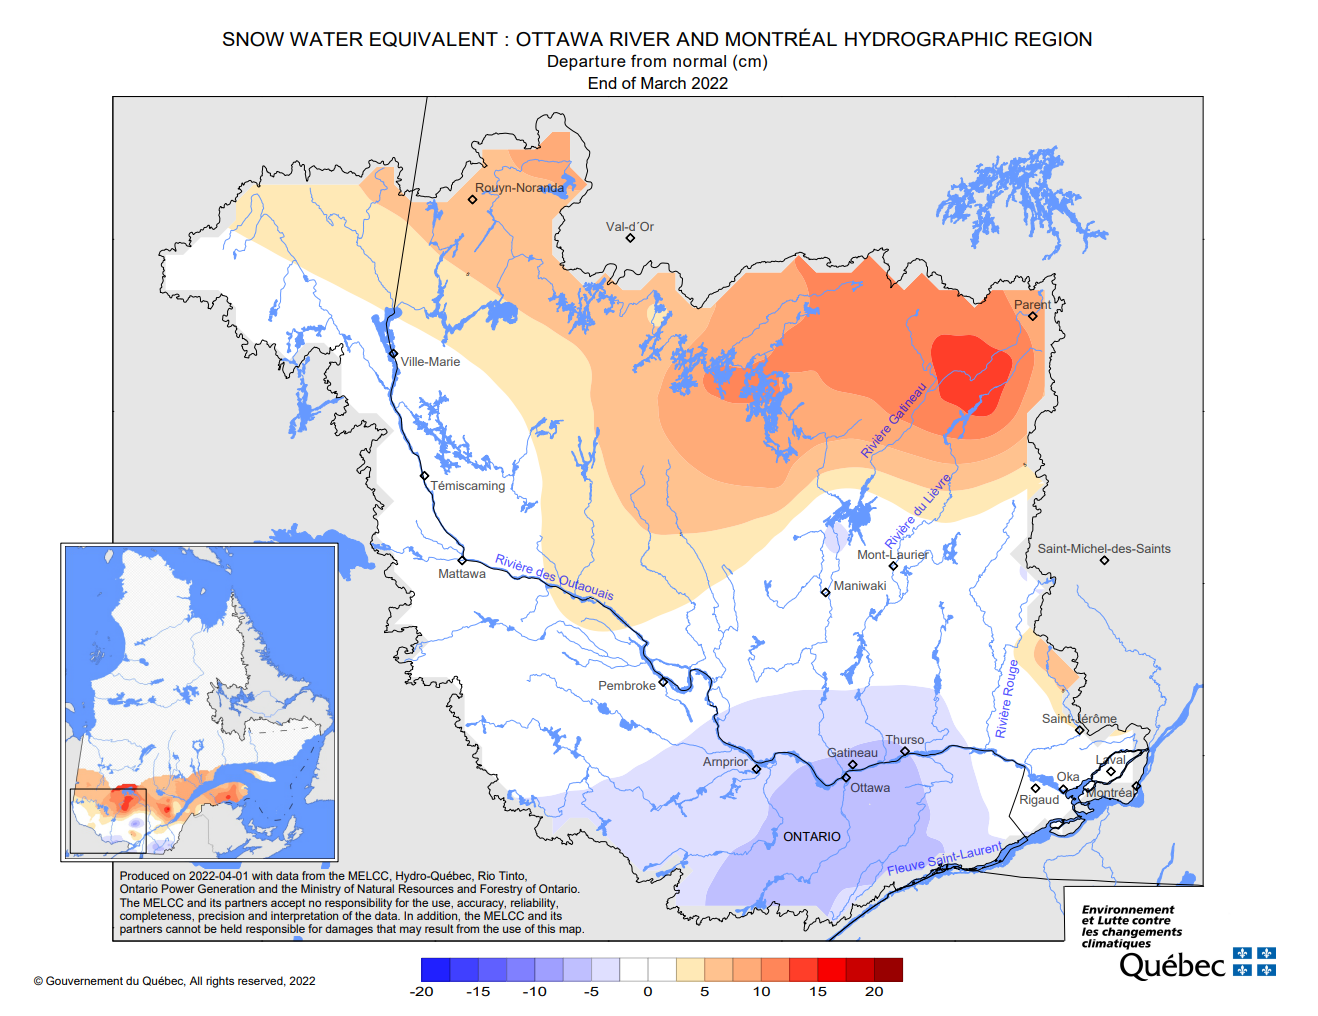 Map depicting the snow water equivalent of the Ottawa River and Montréal Hydrographic region